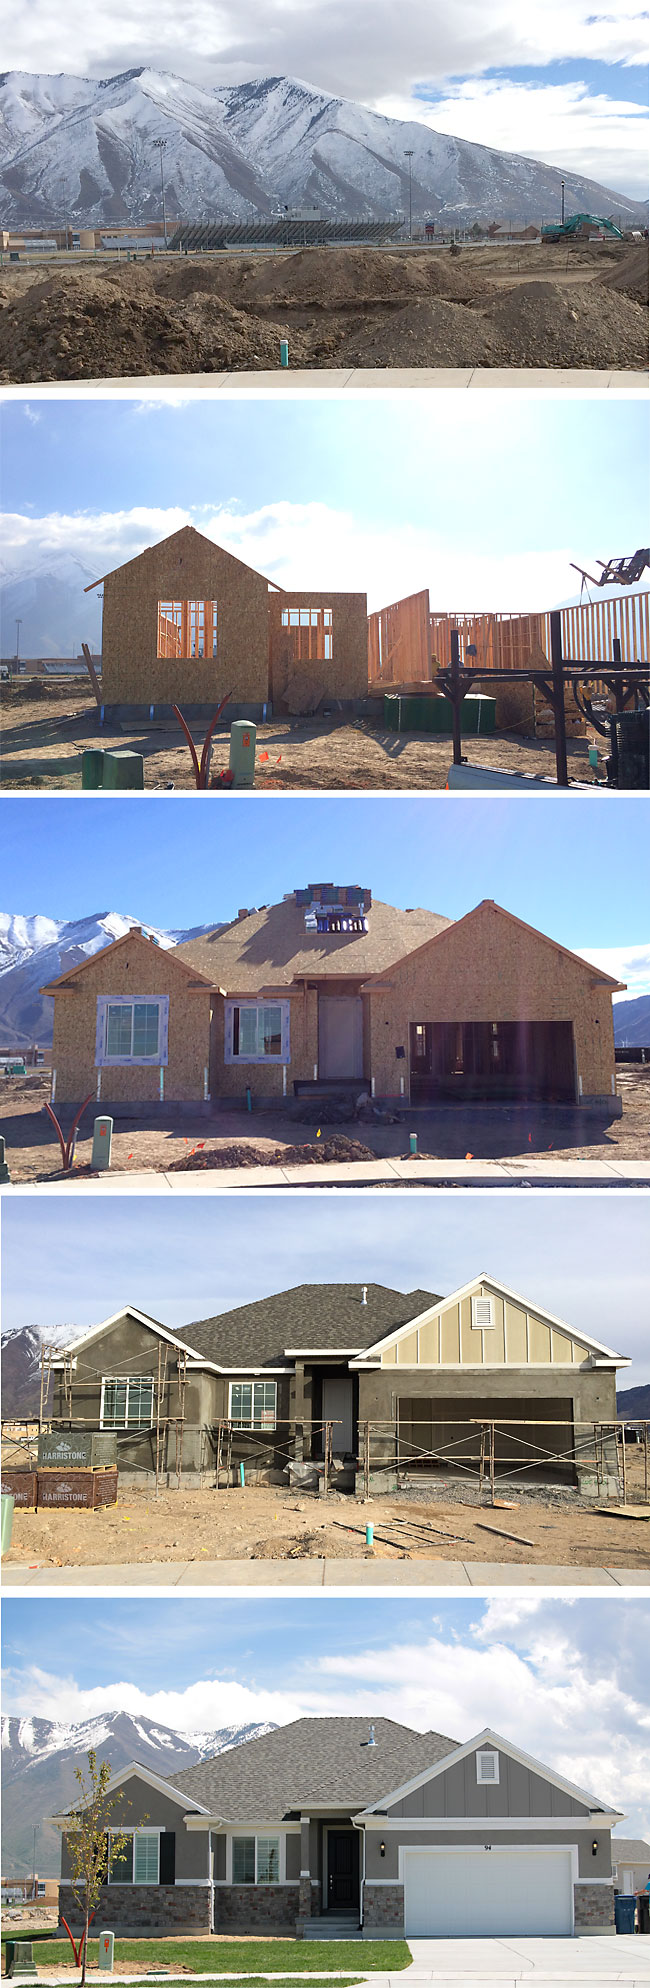 collage of photos showing house in various stages of building process